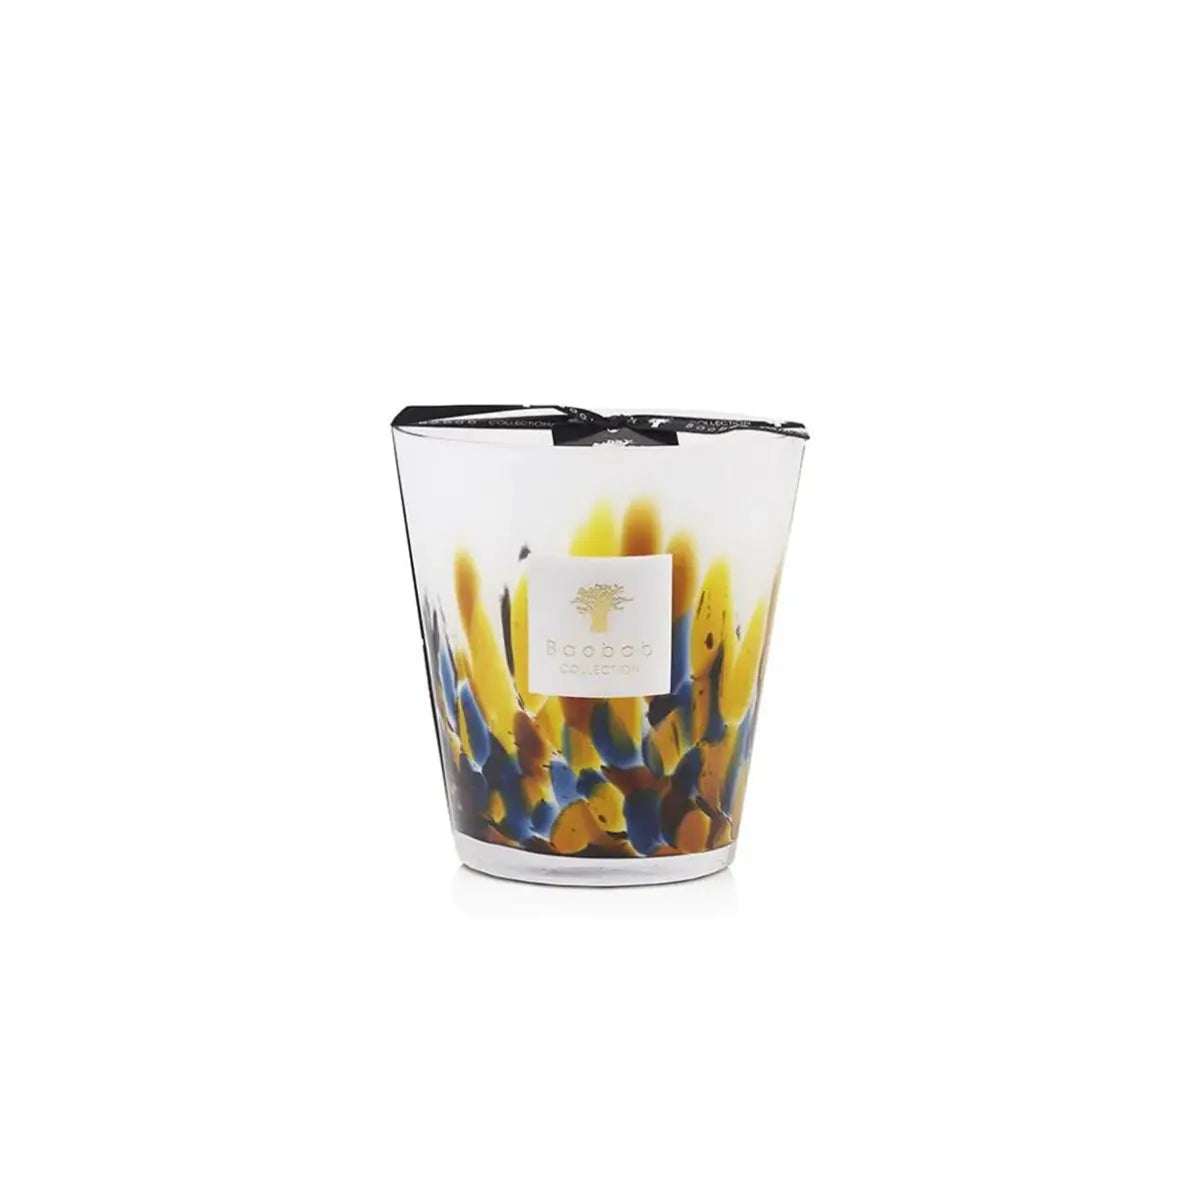 Baobab Collection Max 16 Rainforest Mayumbe Candle